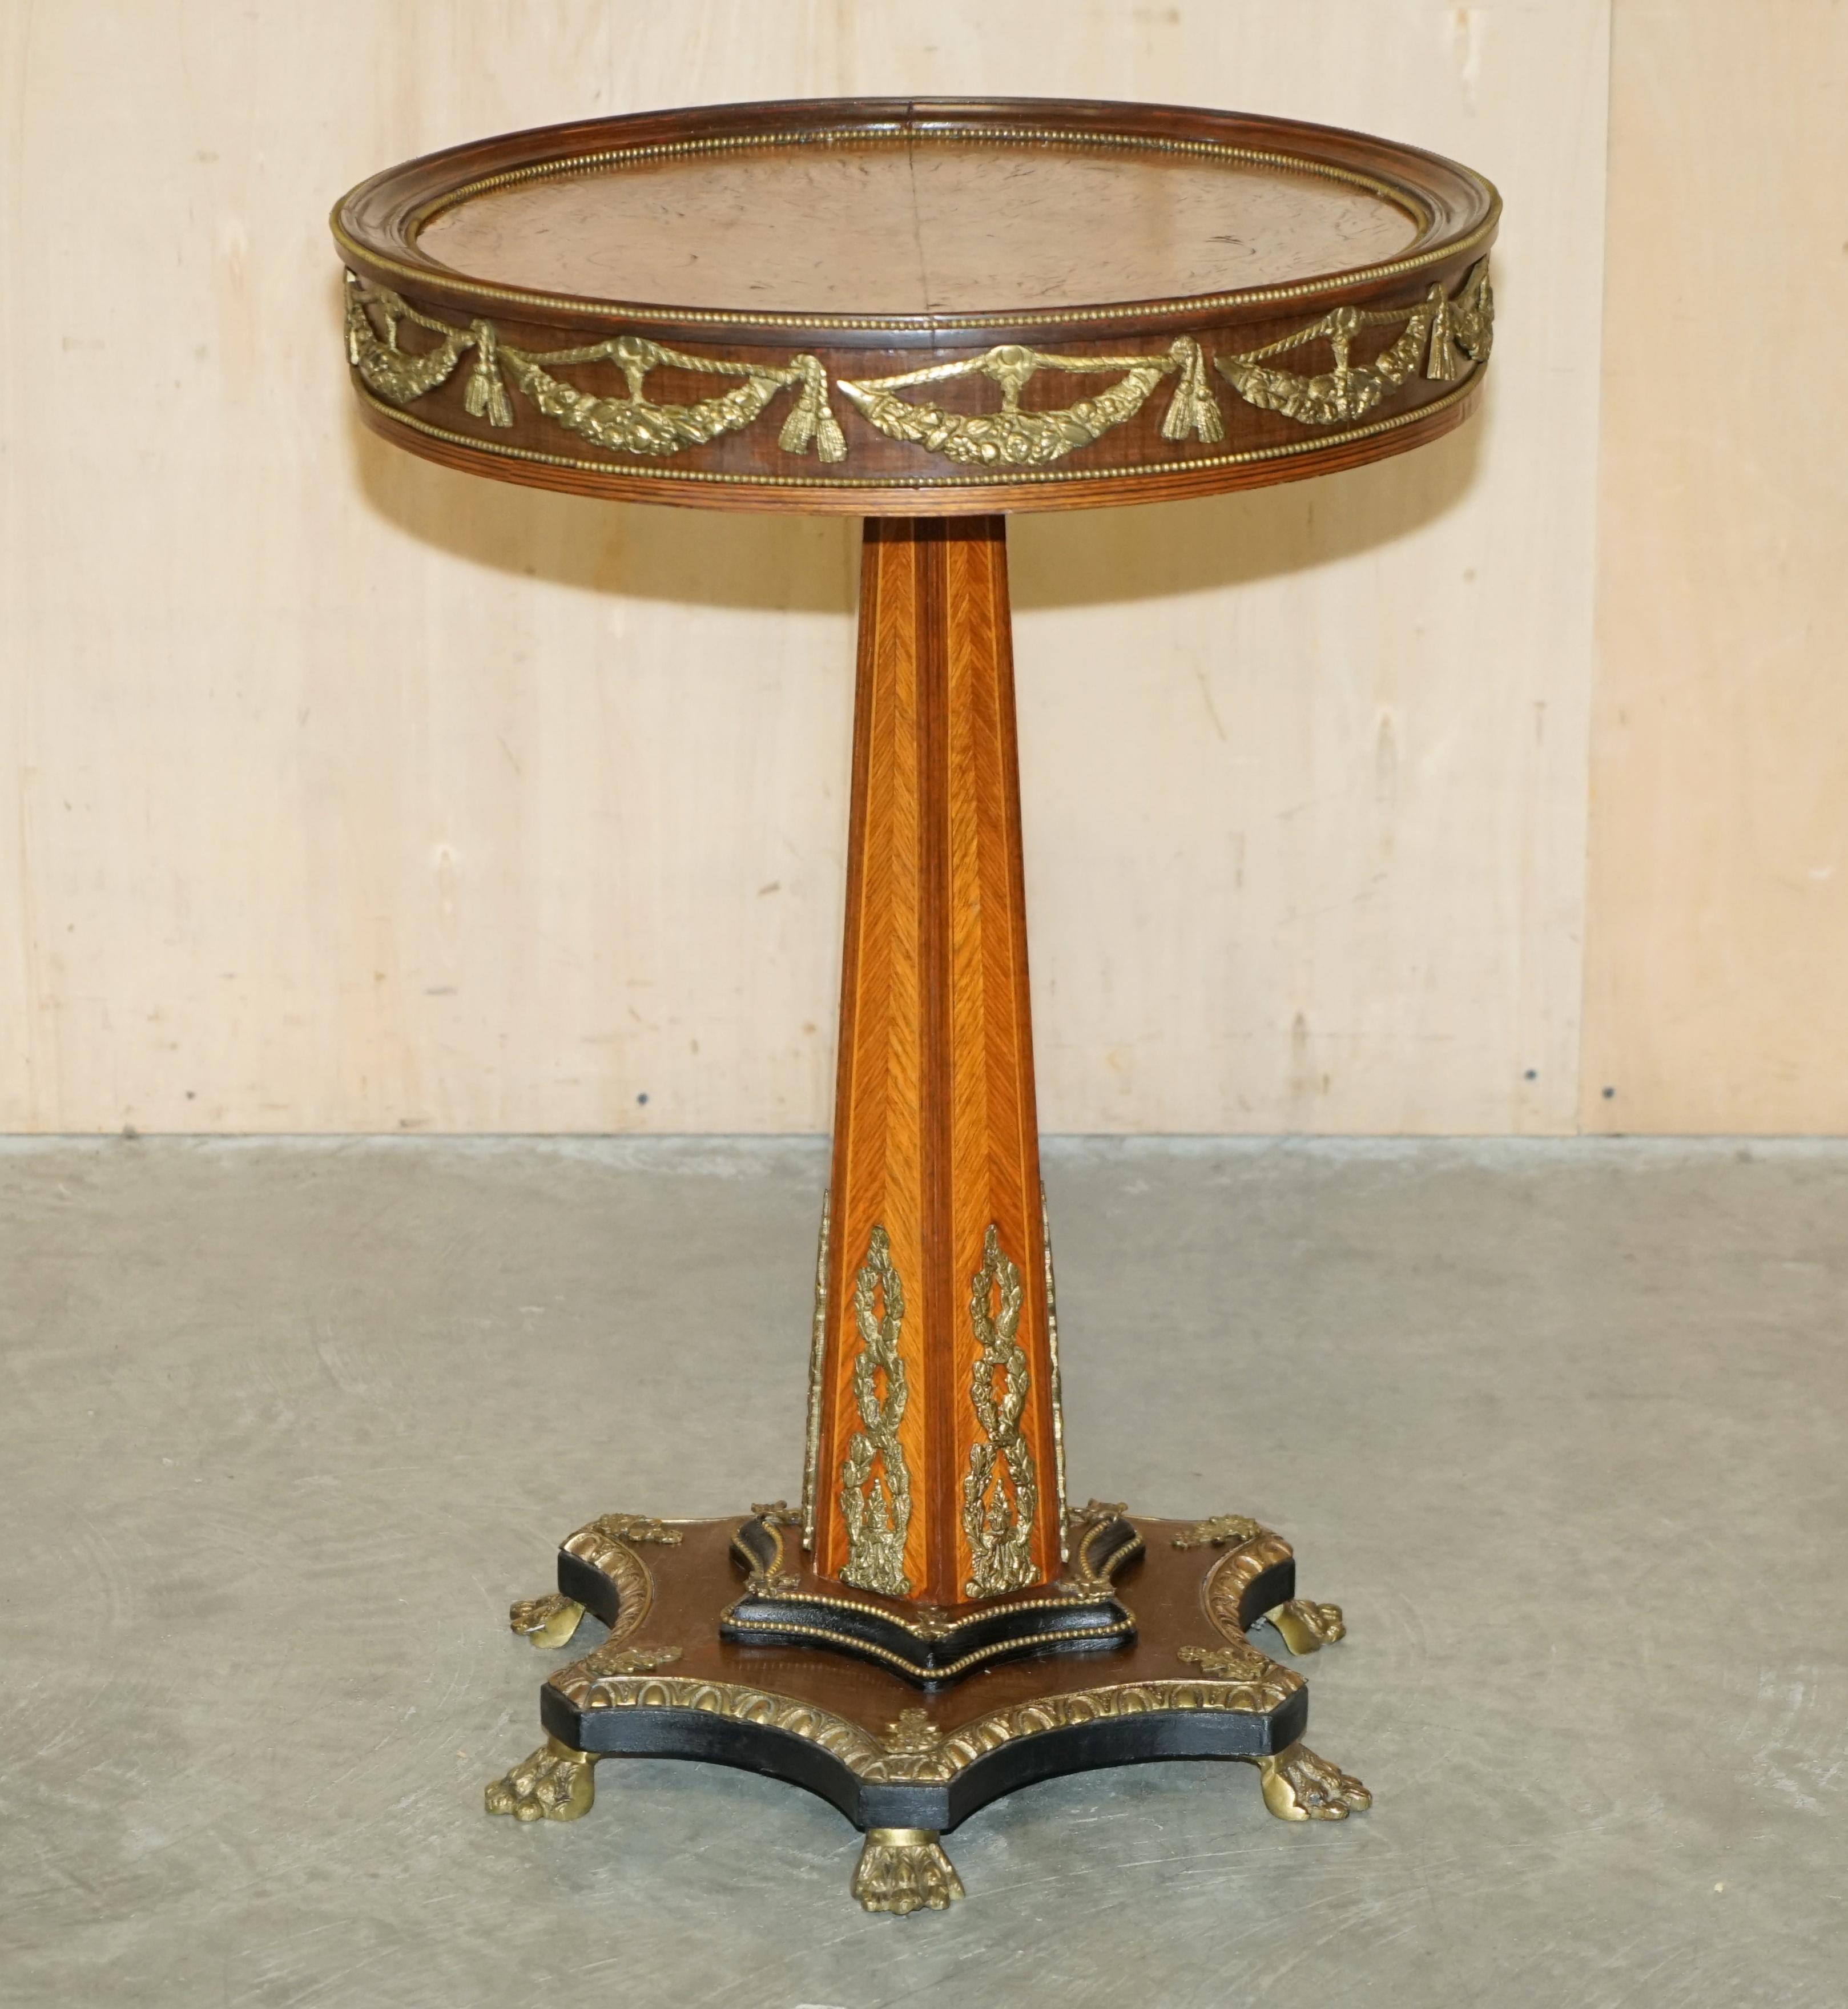 Royal House Antiques

Royal House Antiques is delighted to offer for sale this absolutely exquisite and made Burr Walnut table with ornate Gilt brass detailing and Lion's hairy paw feet

Please note the delivery fee listed is just a guide, it covers